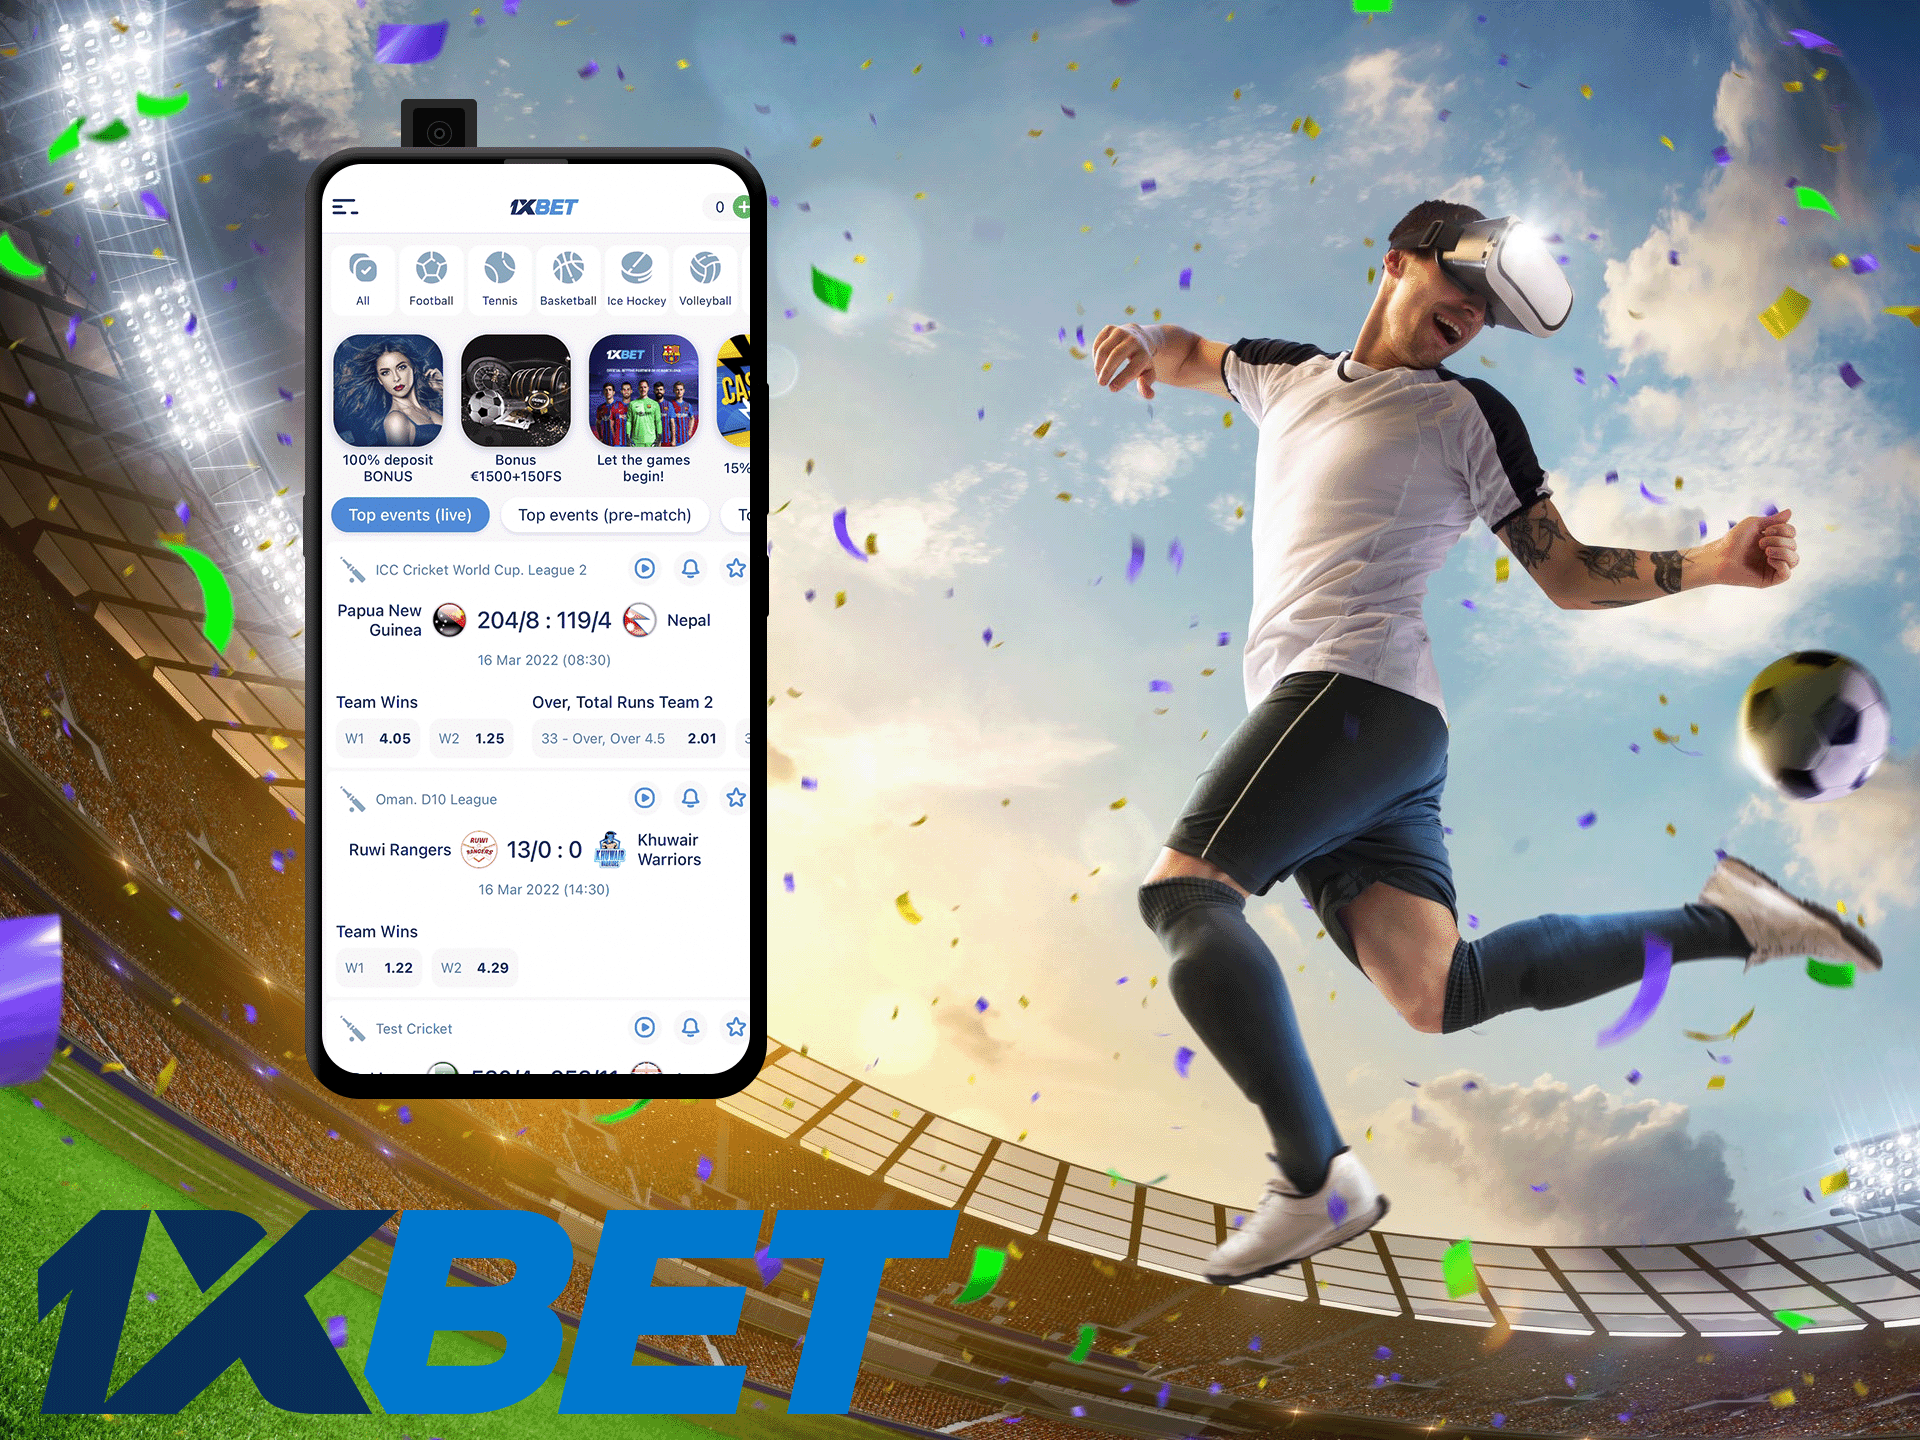 1xbet provides specific electronic games.